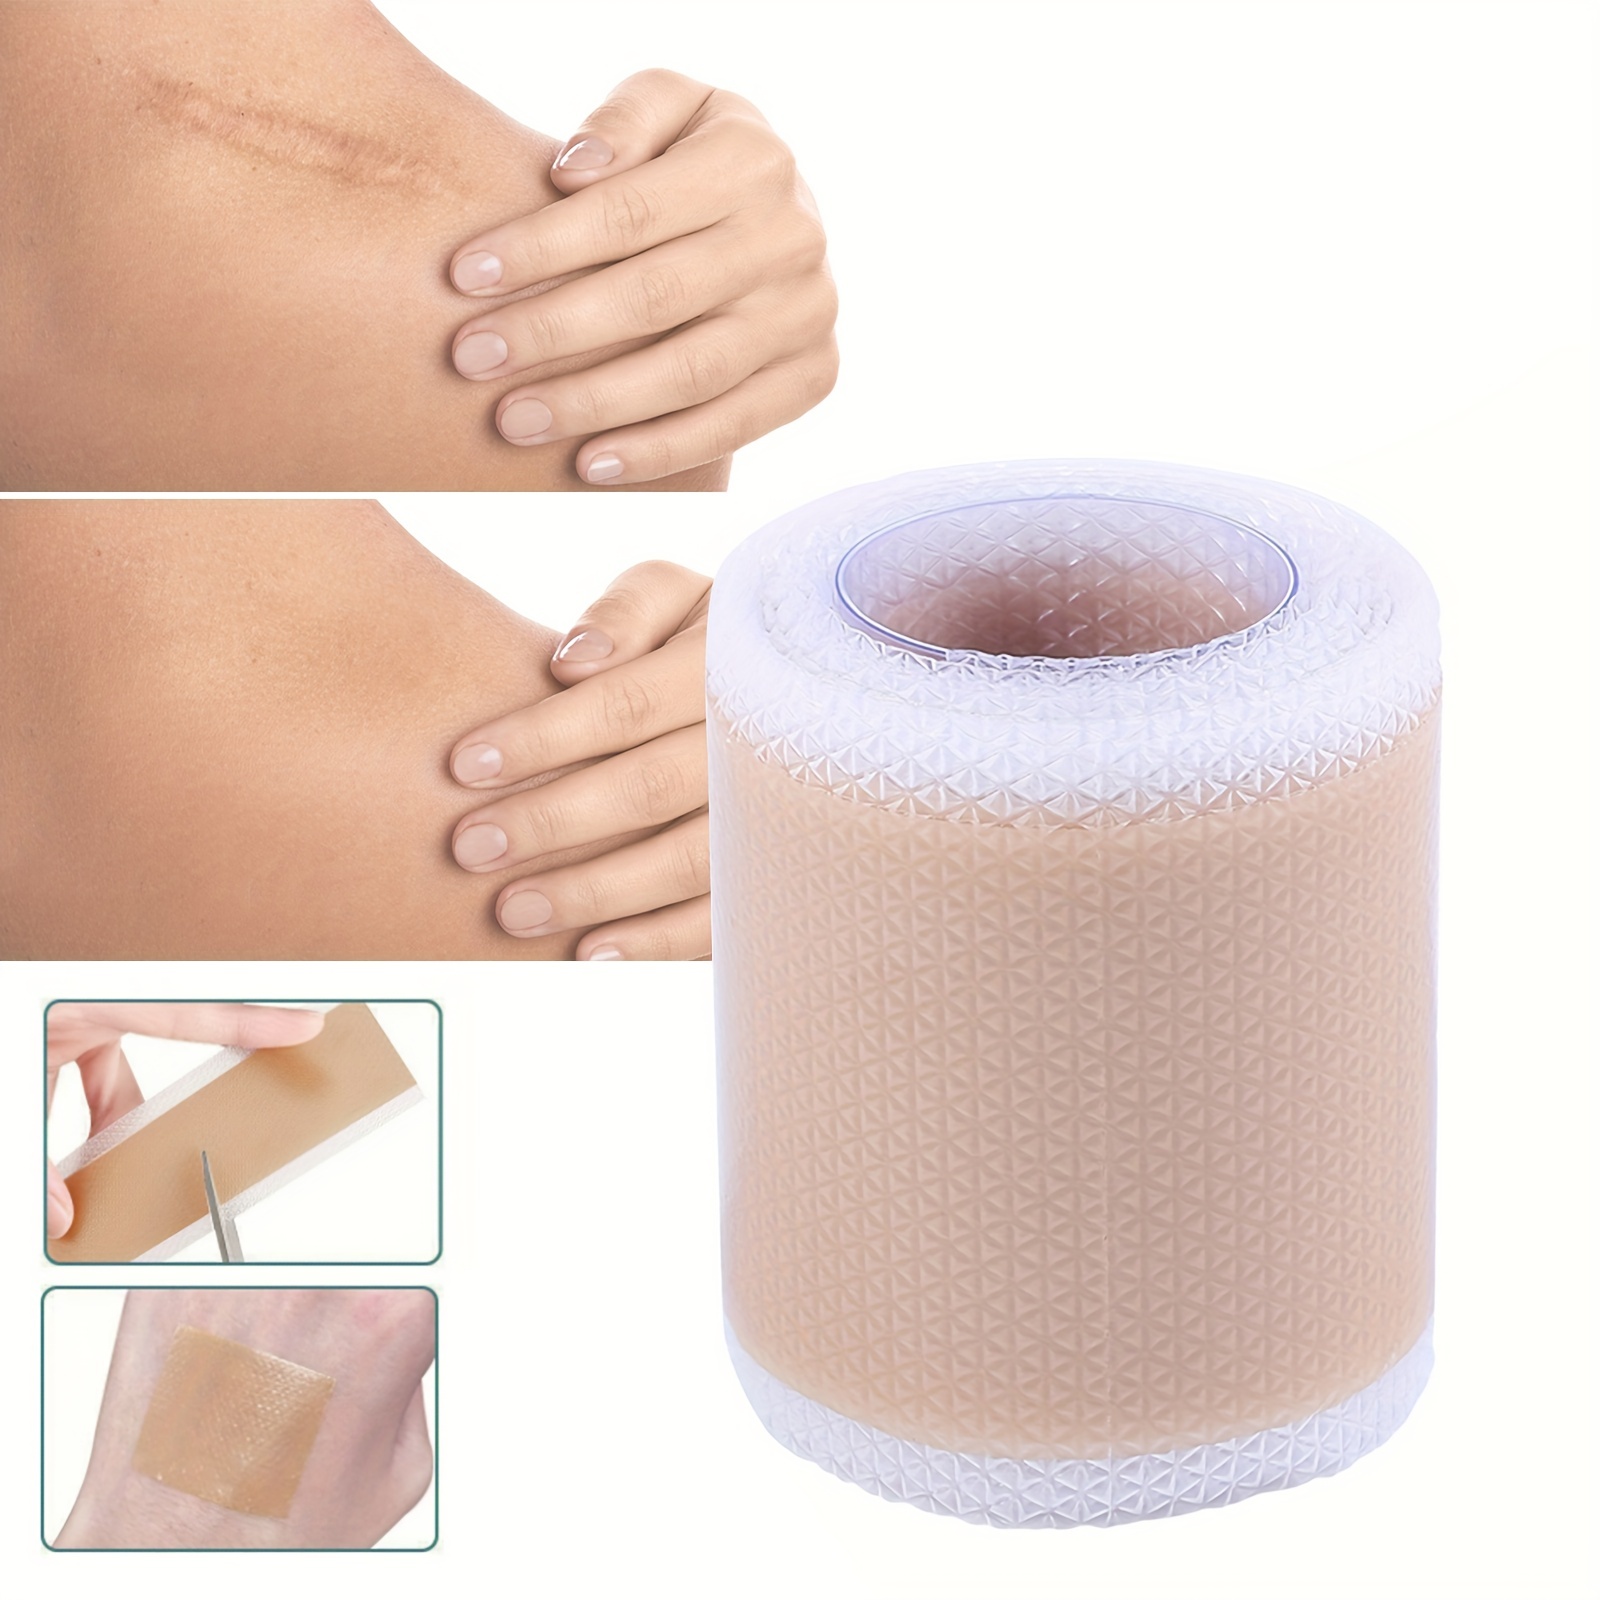 Silicone Scar Sheets - Silicone Scar Tape - Scar Away - C Section  Postpartum Essentials -Keloid Scar Removal - Silicone Tape - Silicone Scar  Gel (5.7